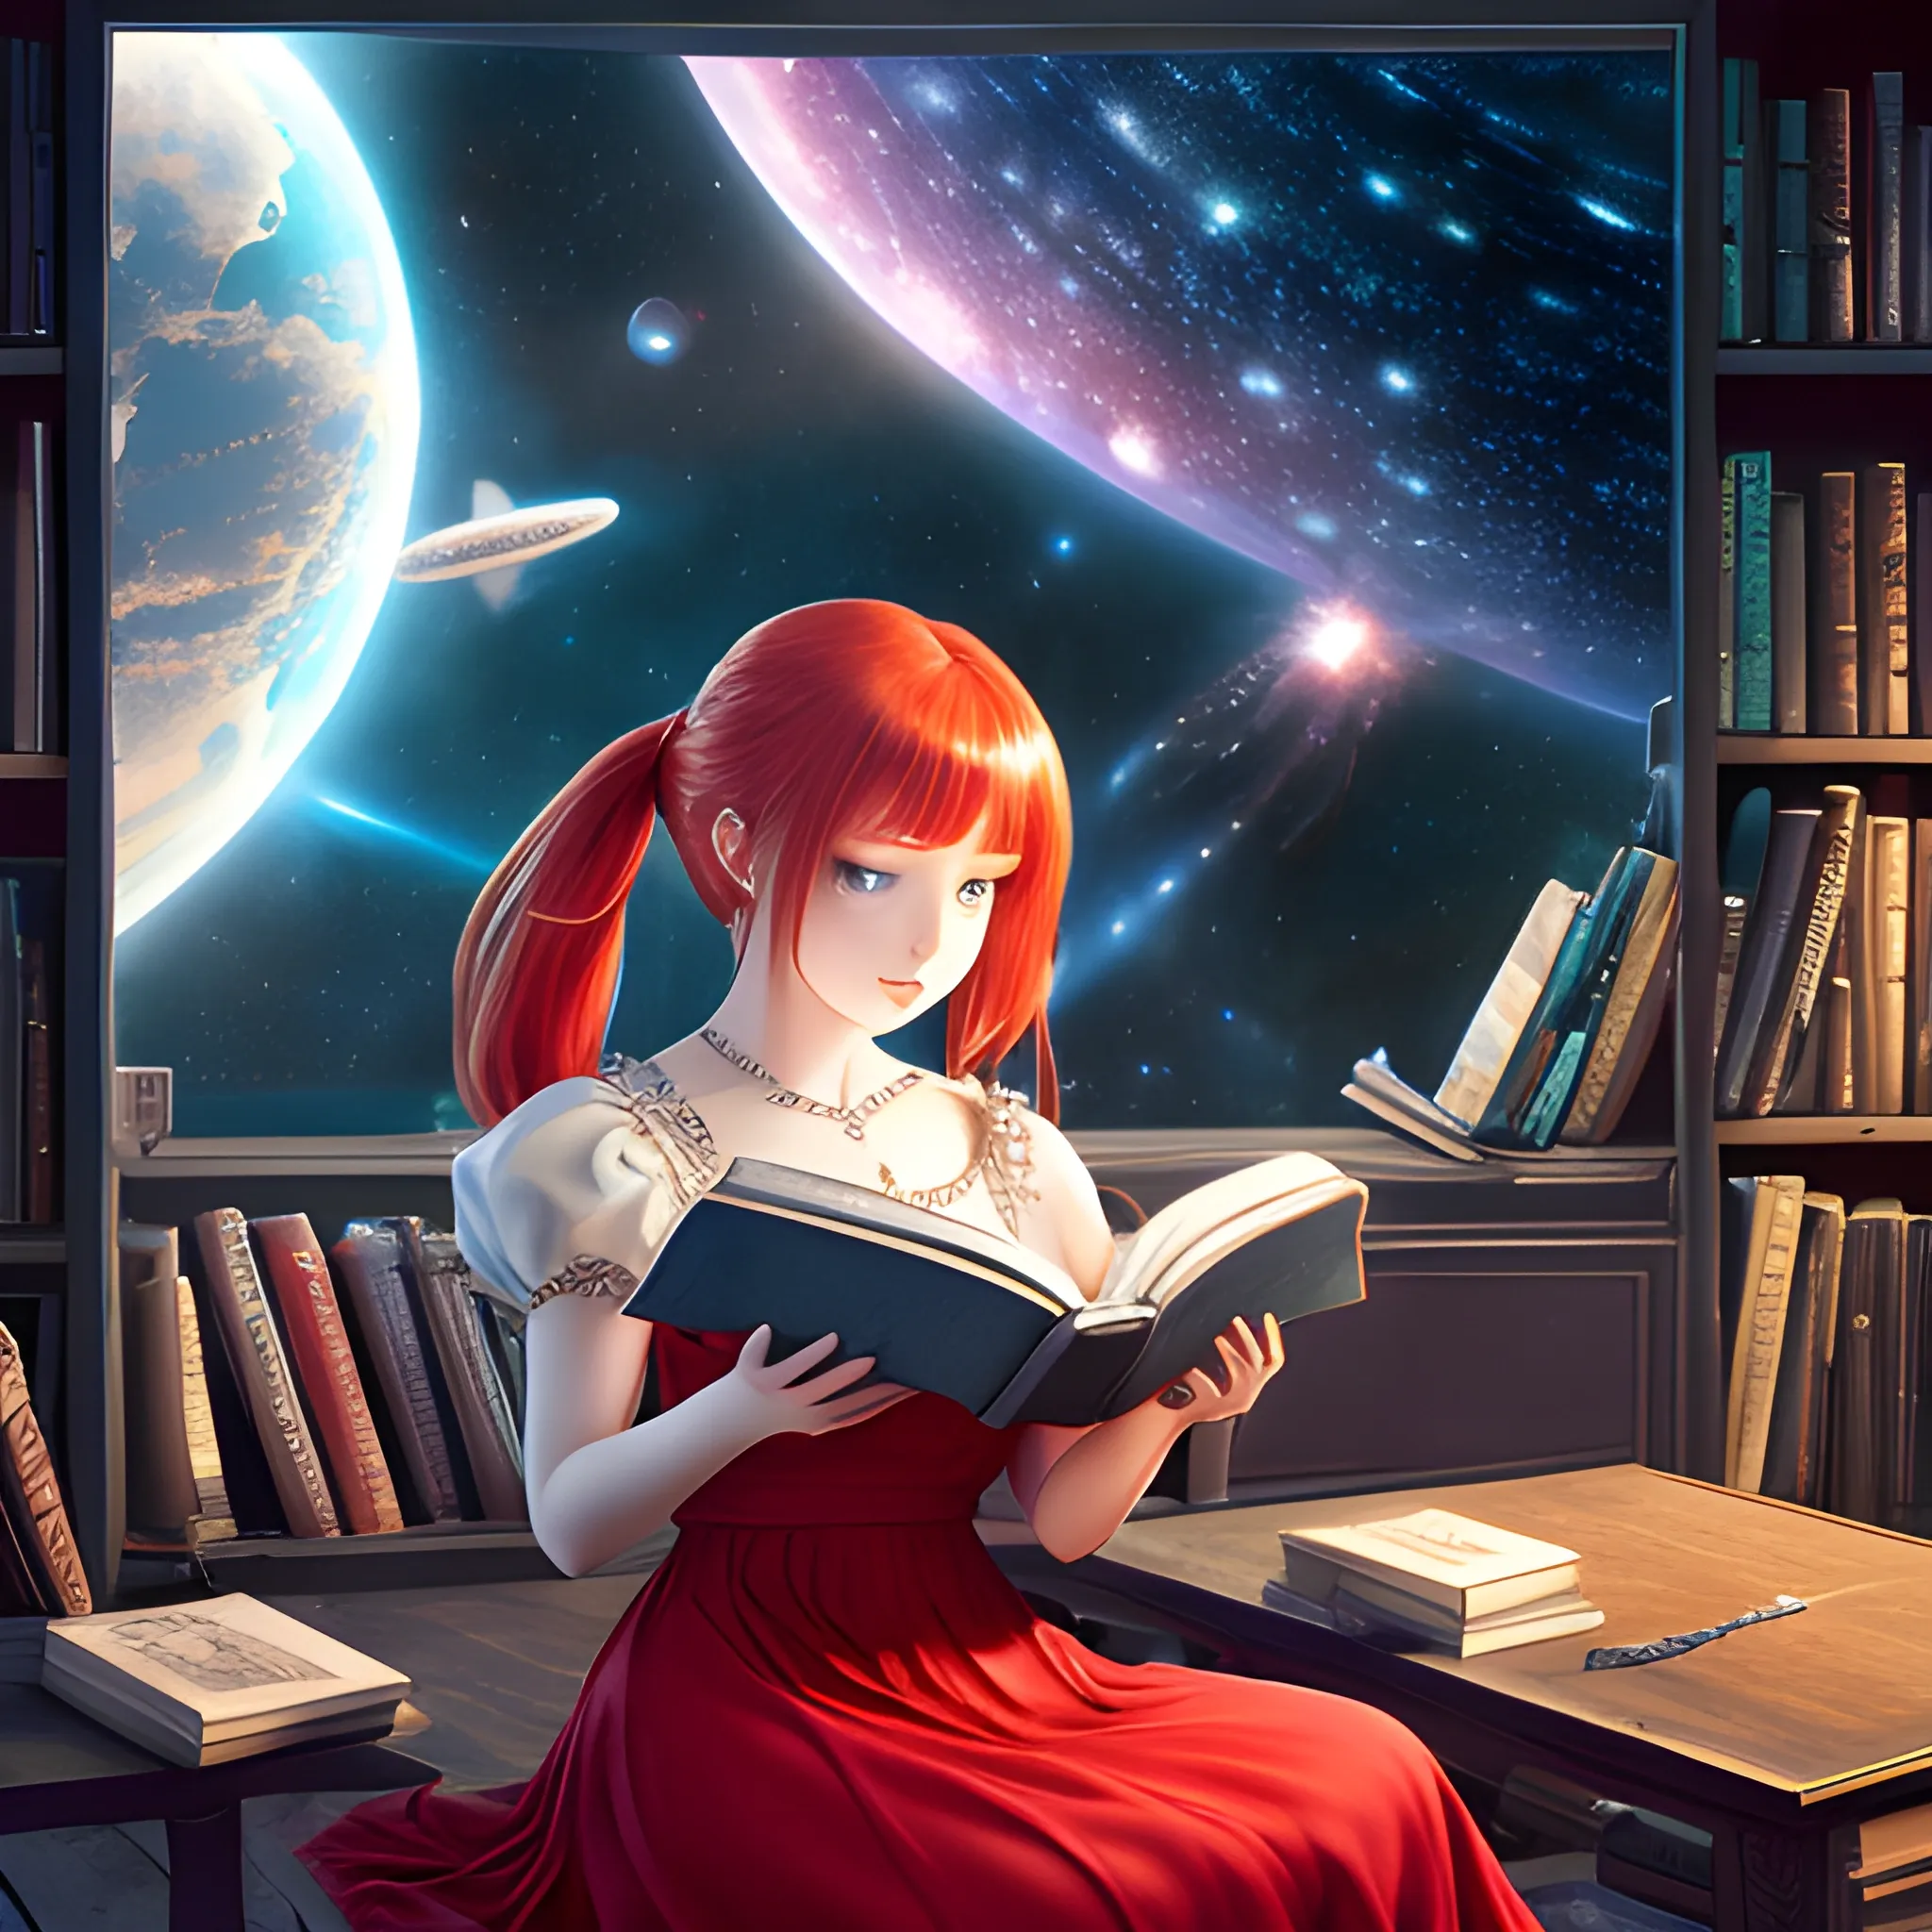 (((high detail))), best quality, (detailed), (high resolution) silver universe, books, books on a table, shelf with some books, studio ghiblin, anime, galaxy in the sky, woman  reading a book ,red hair, red dress, big black eyes 
 
, Trippy, 
